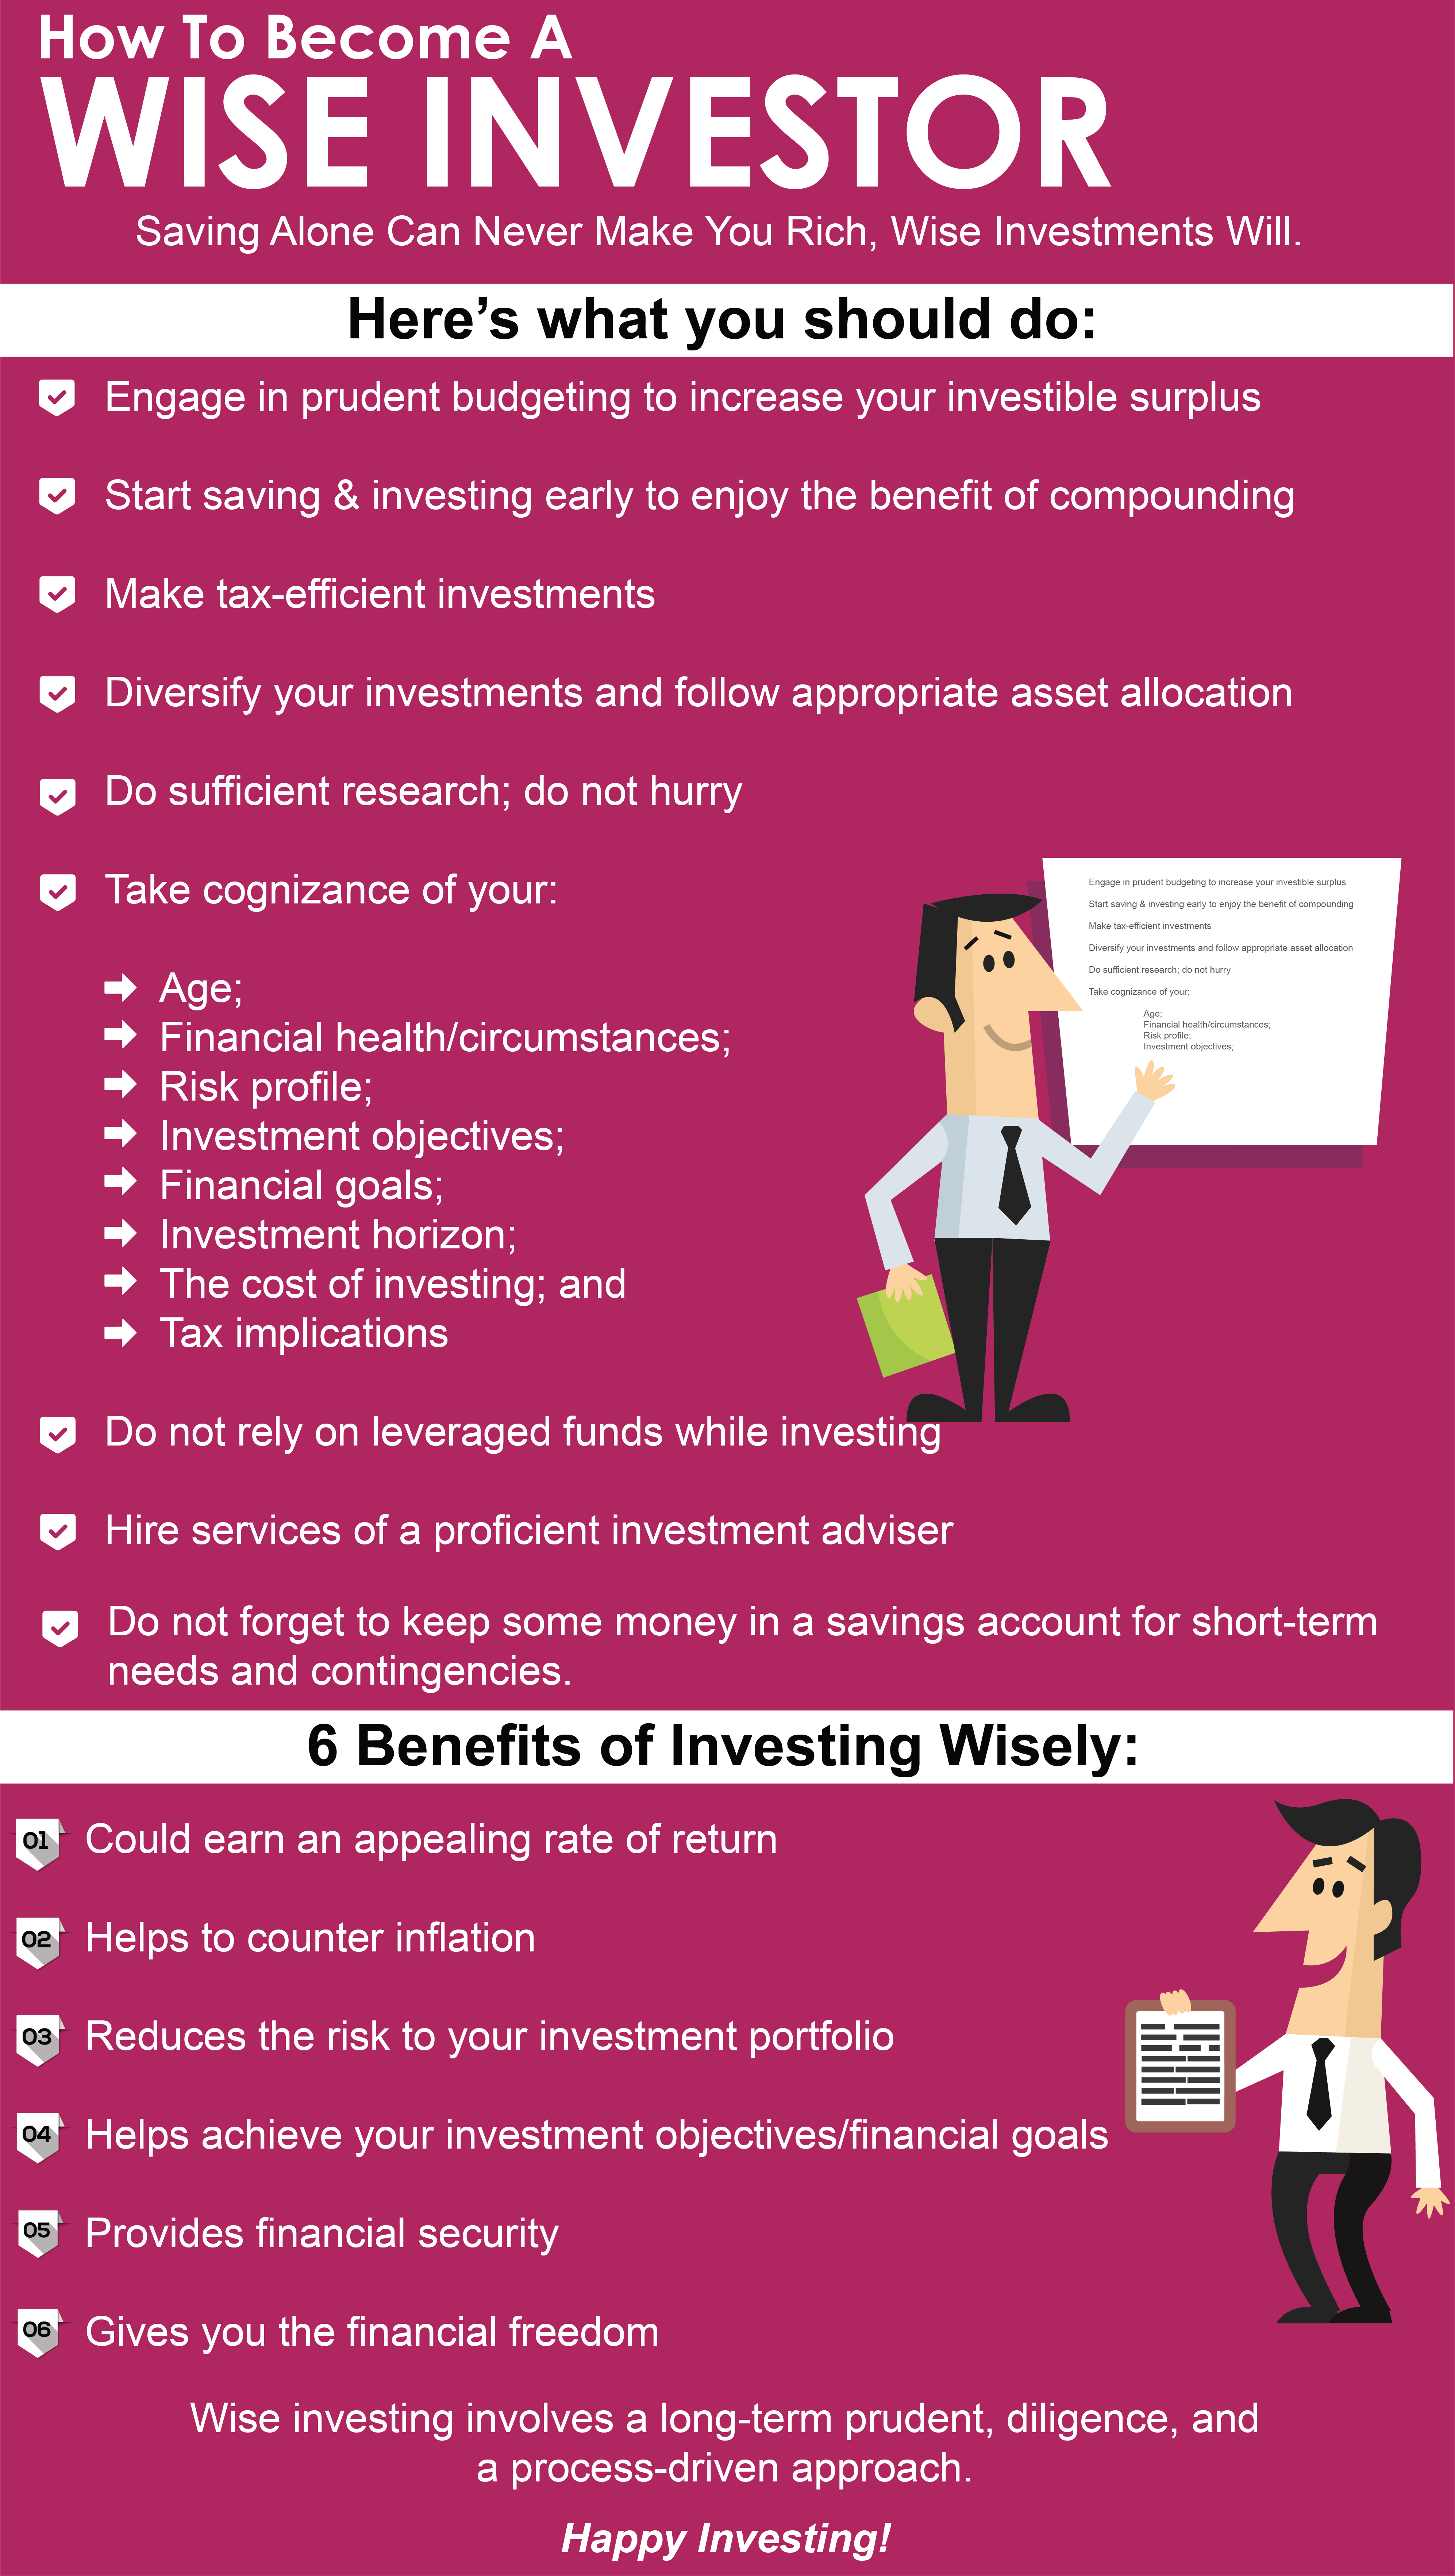 How To Become A Wise Investor